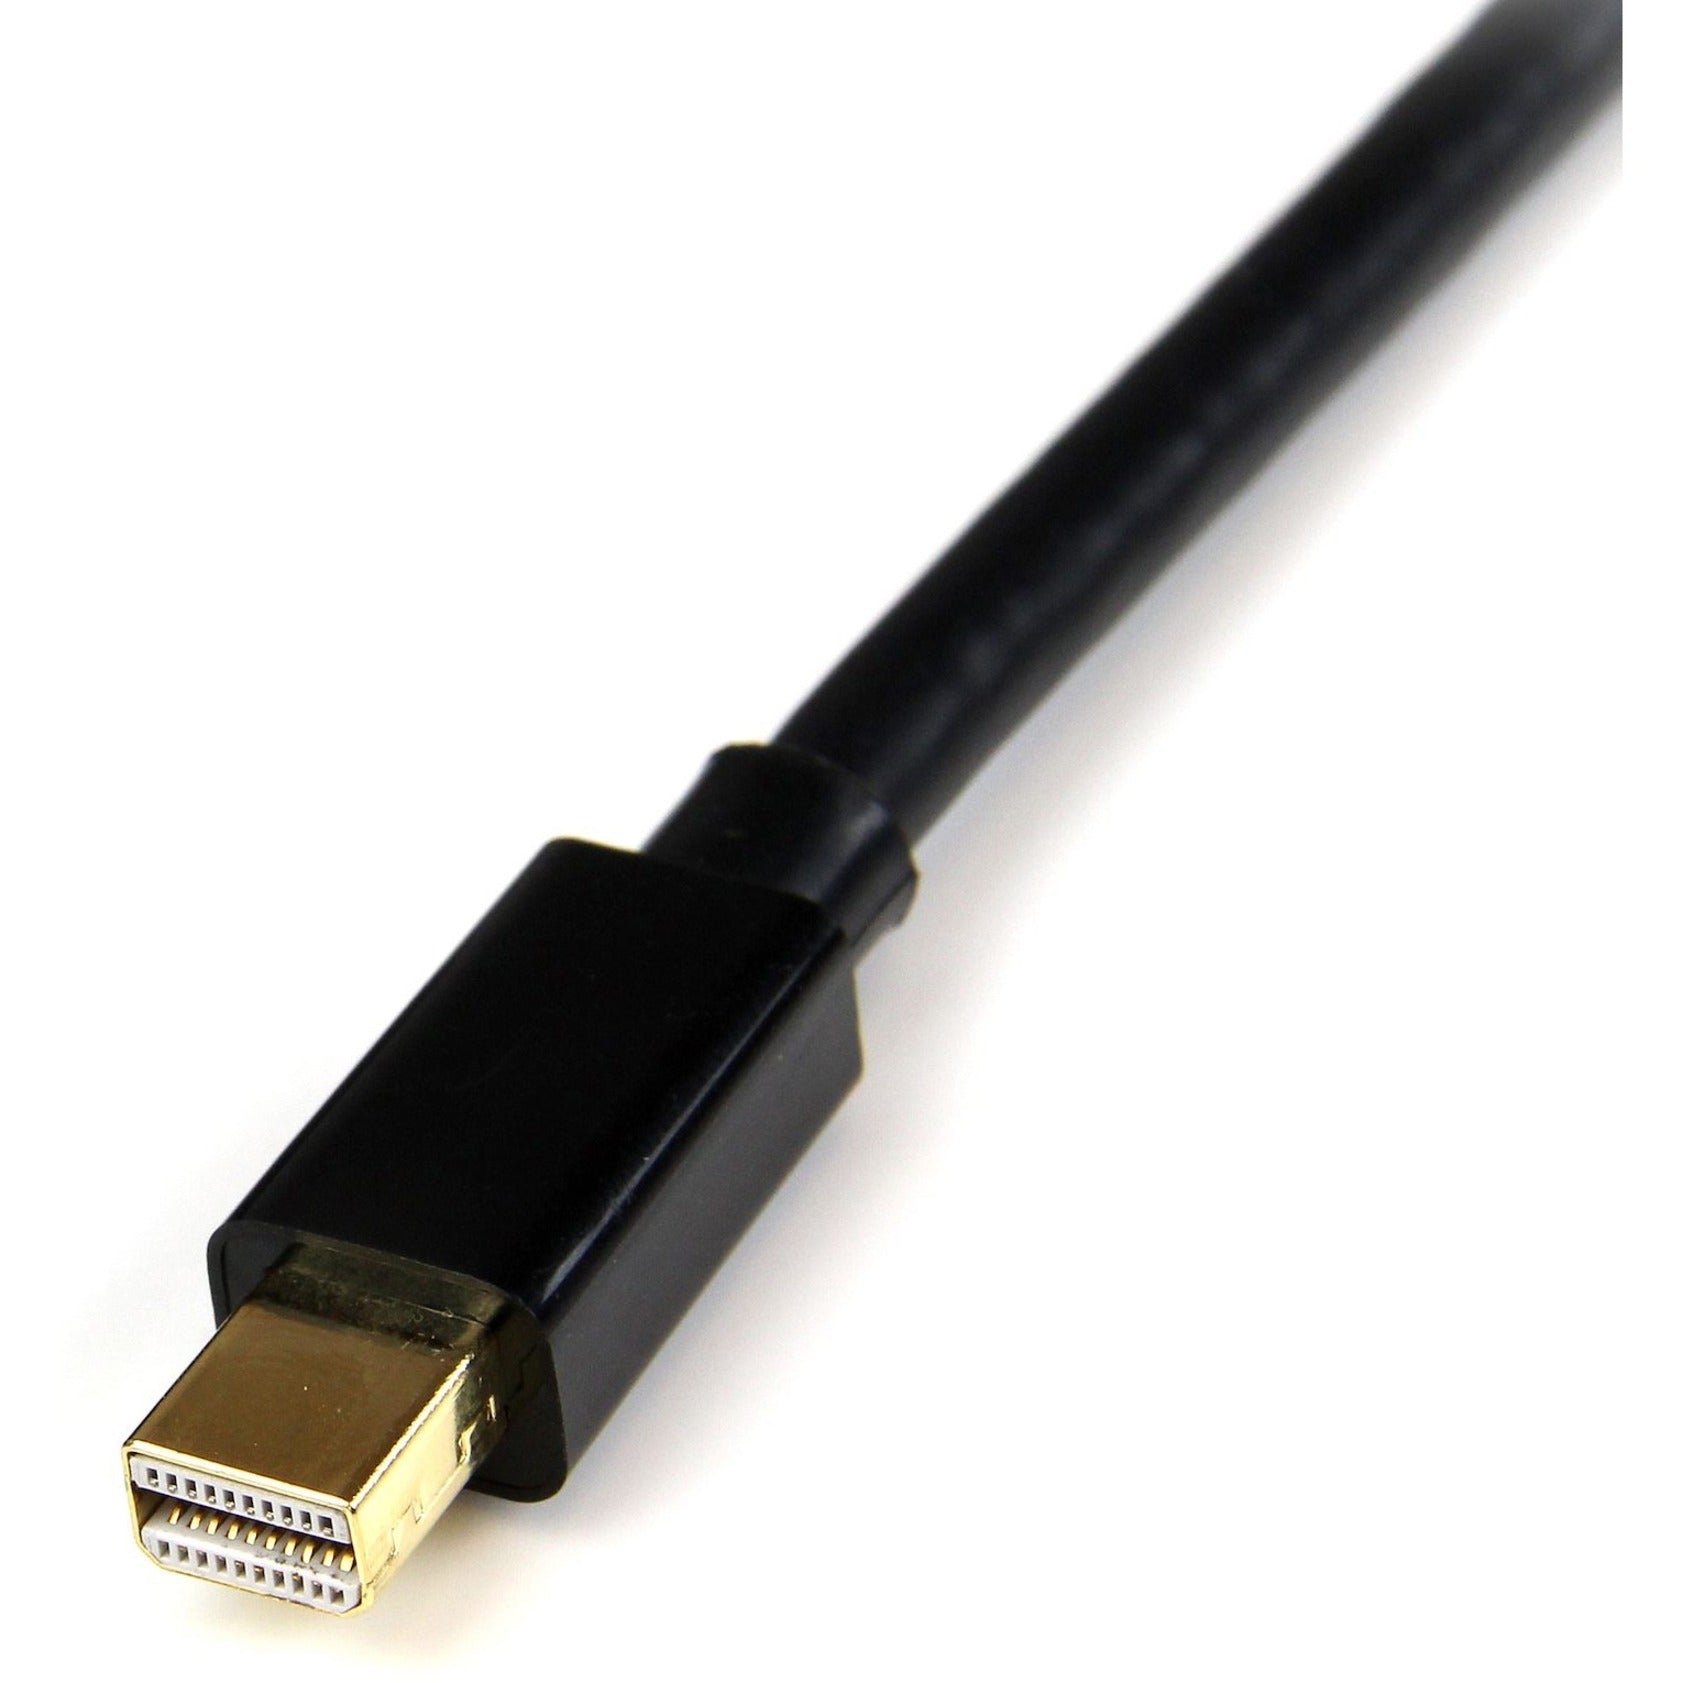 StarTech.com MDPEXT3 3 ft Mini DisplayPort 1.2 Video Extension Cable M/F, 4k Display, Gold Plated Connectors [Discontinued]